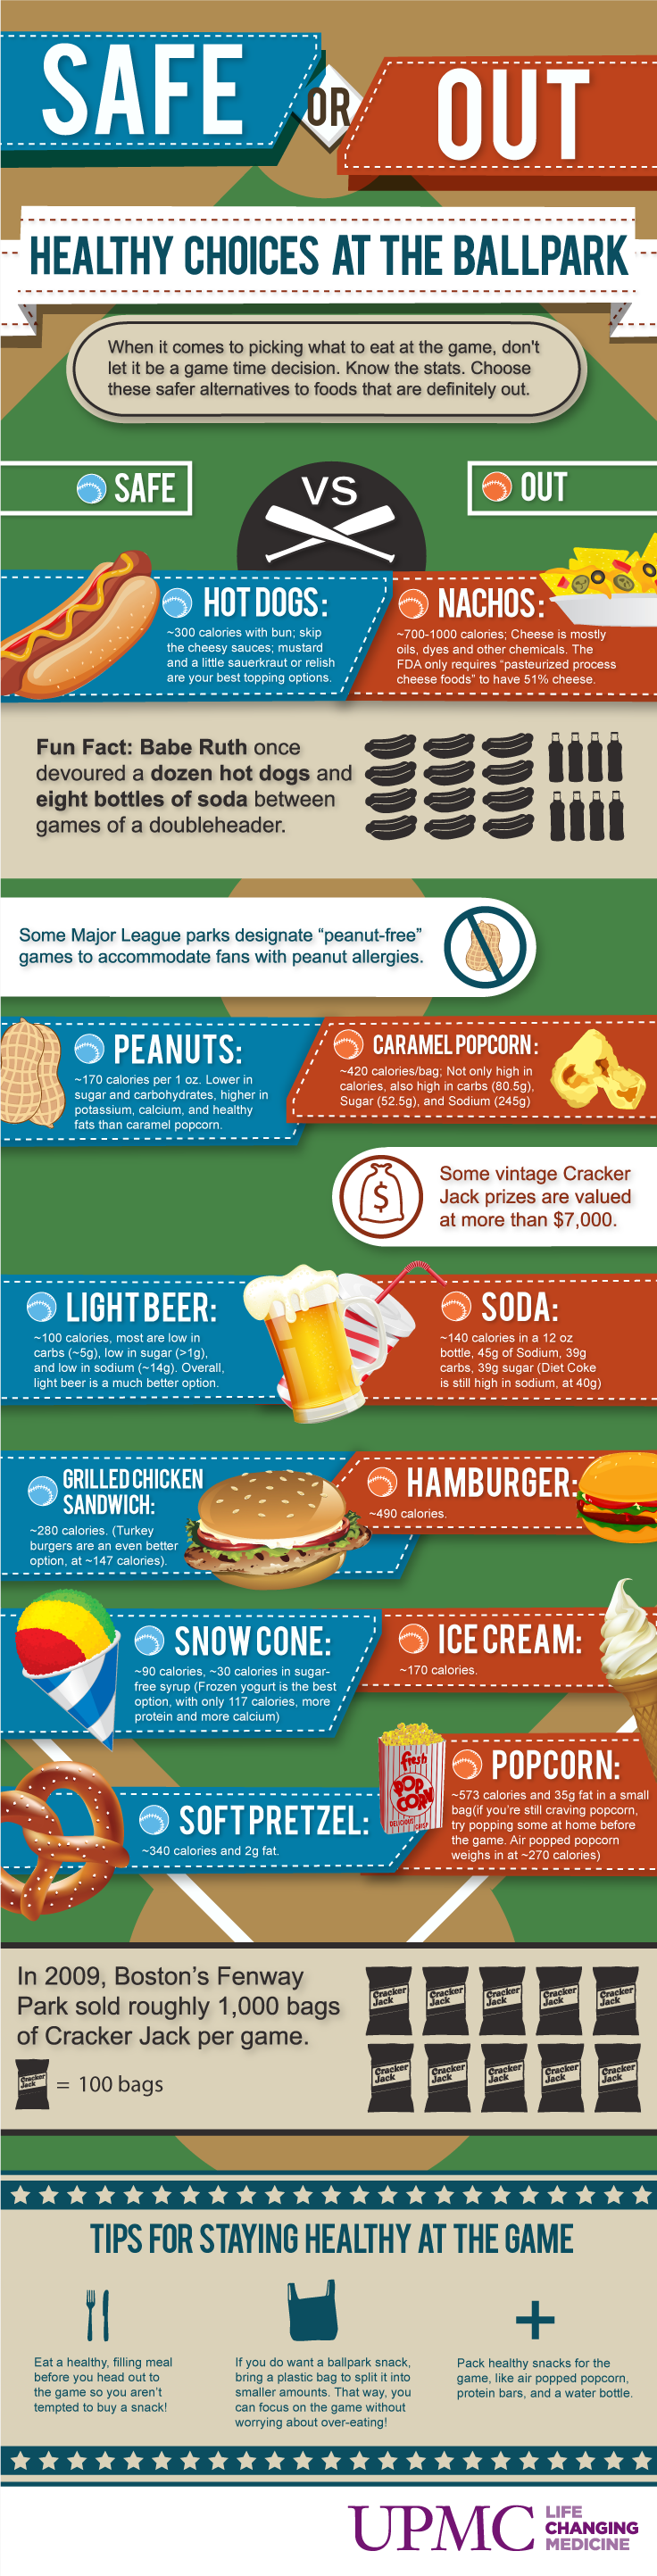 Ballpark Healthy Choices Infographic